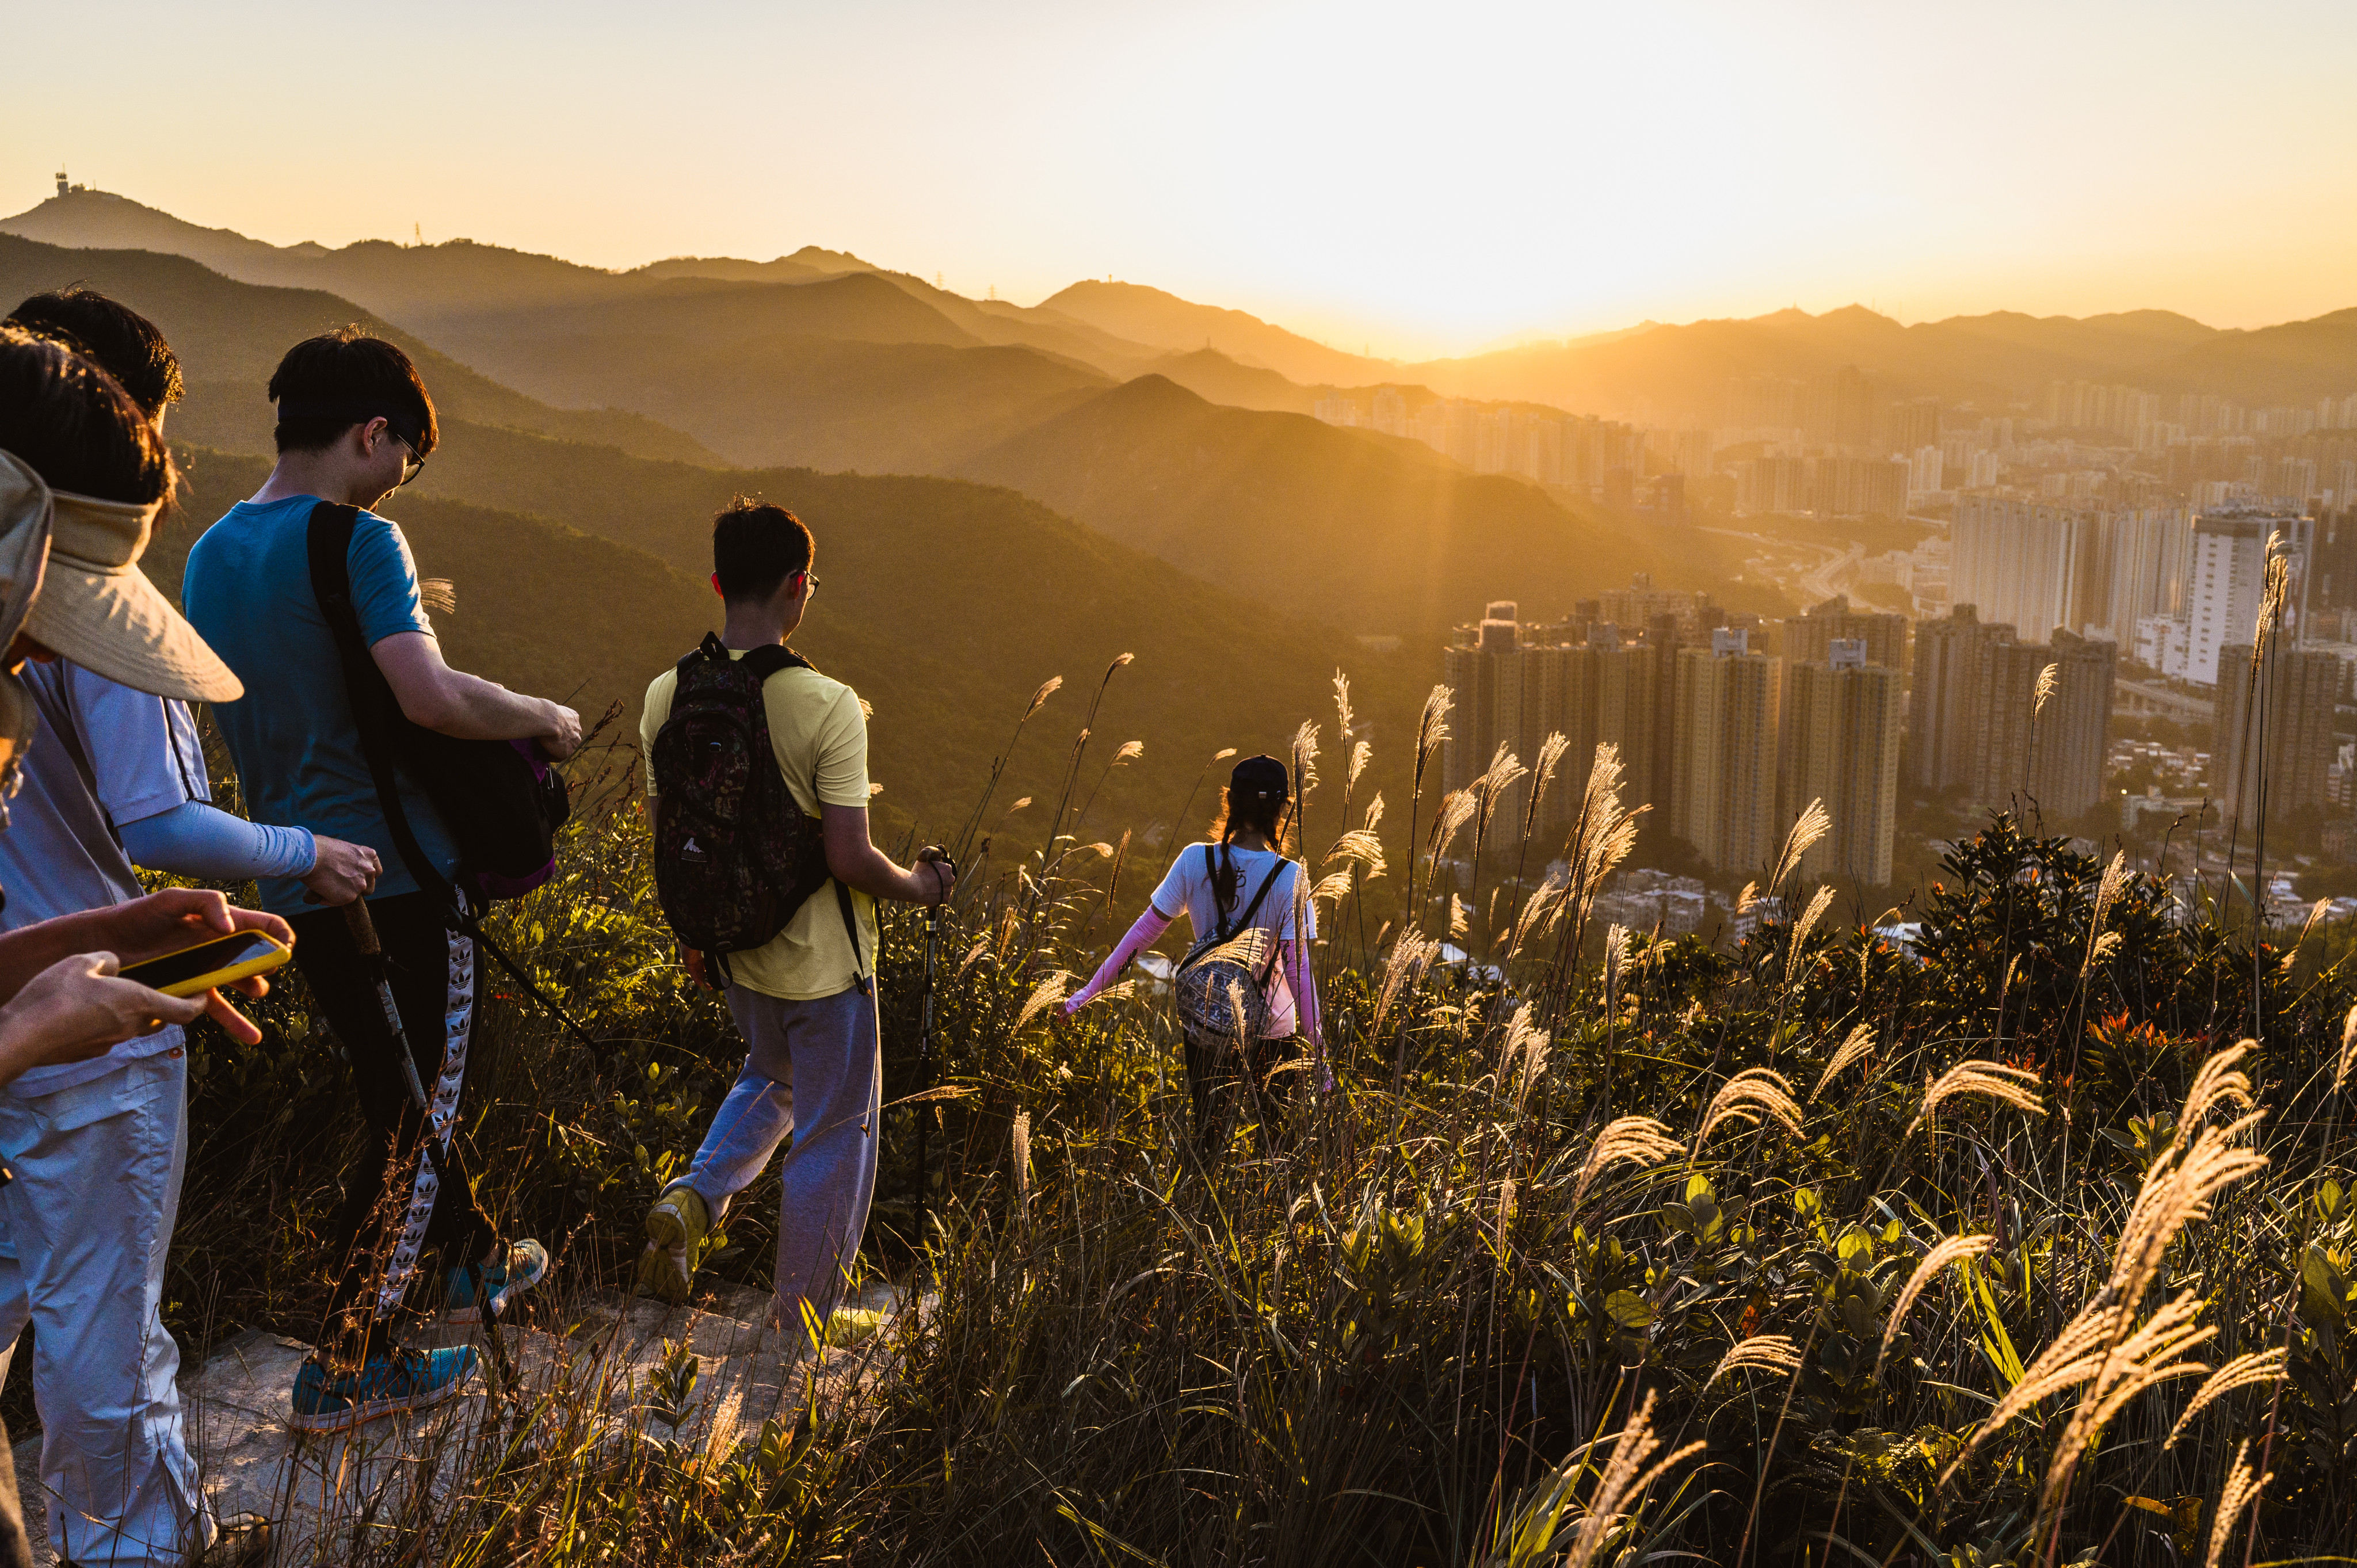 Move It for Mental Health encourages Hong Kong residents to increase their outdoor activity in March by going 30km – any way they choose – in nature. Photo: Shutterstock